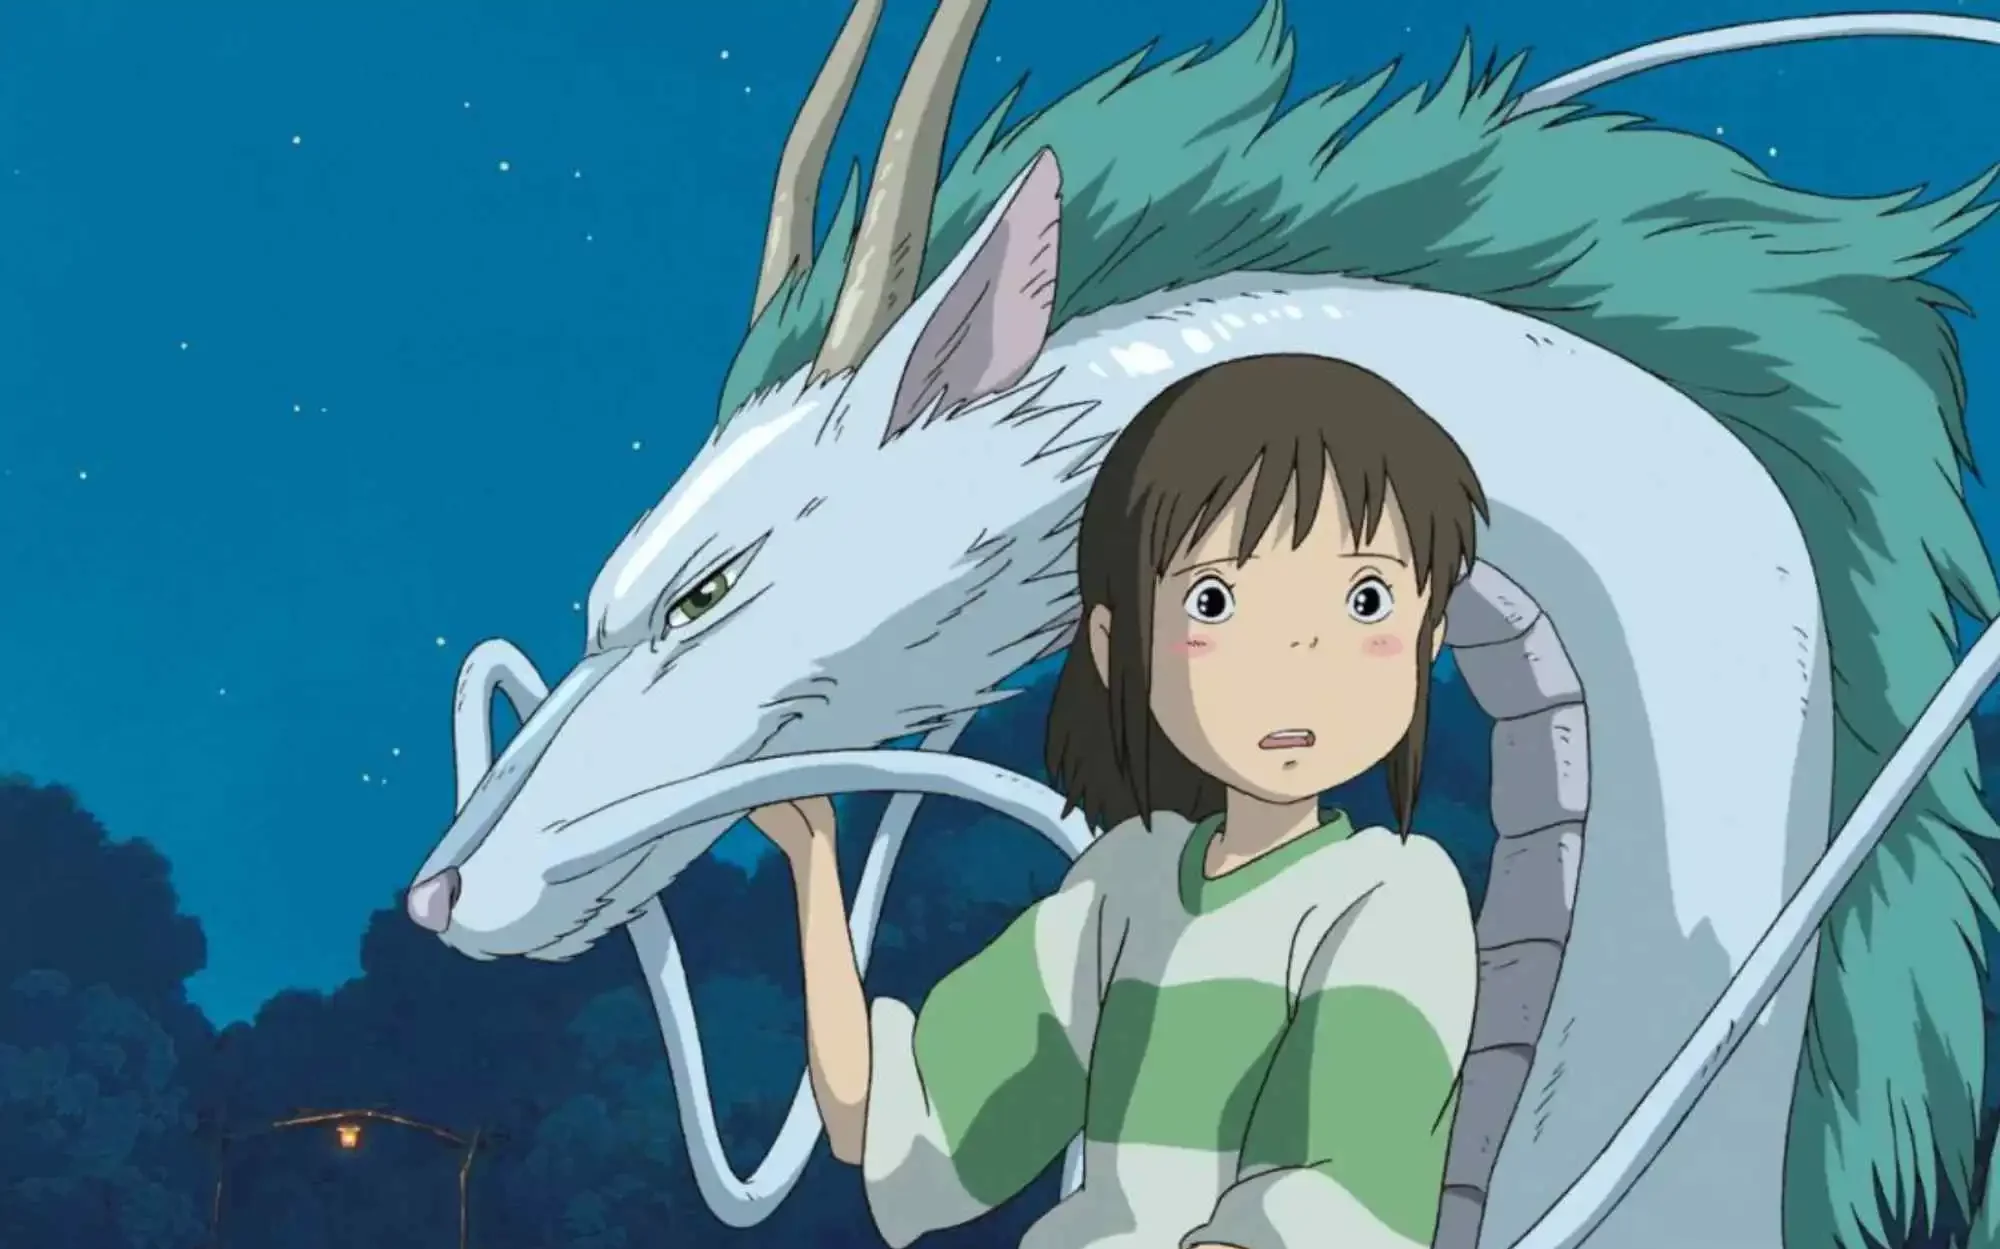 20 Sad Anime Movies On Netflix To Make You Cry Your Eyes Out - Viebly